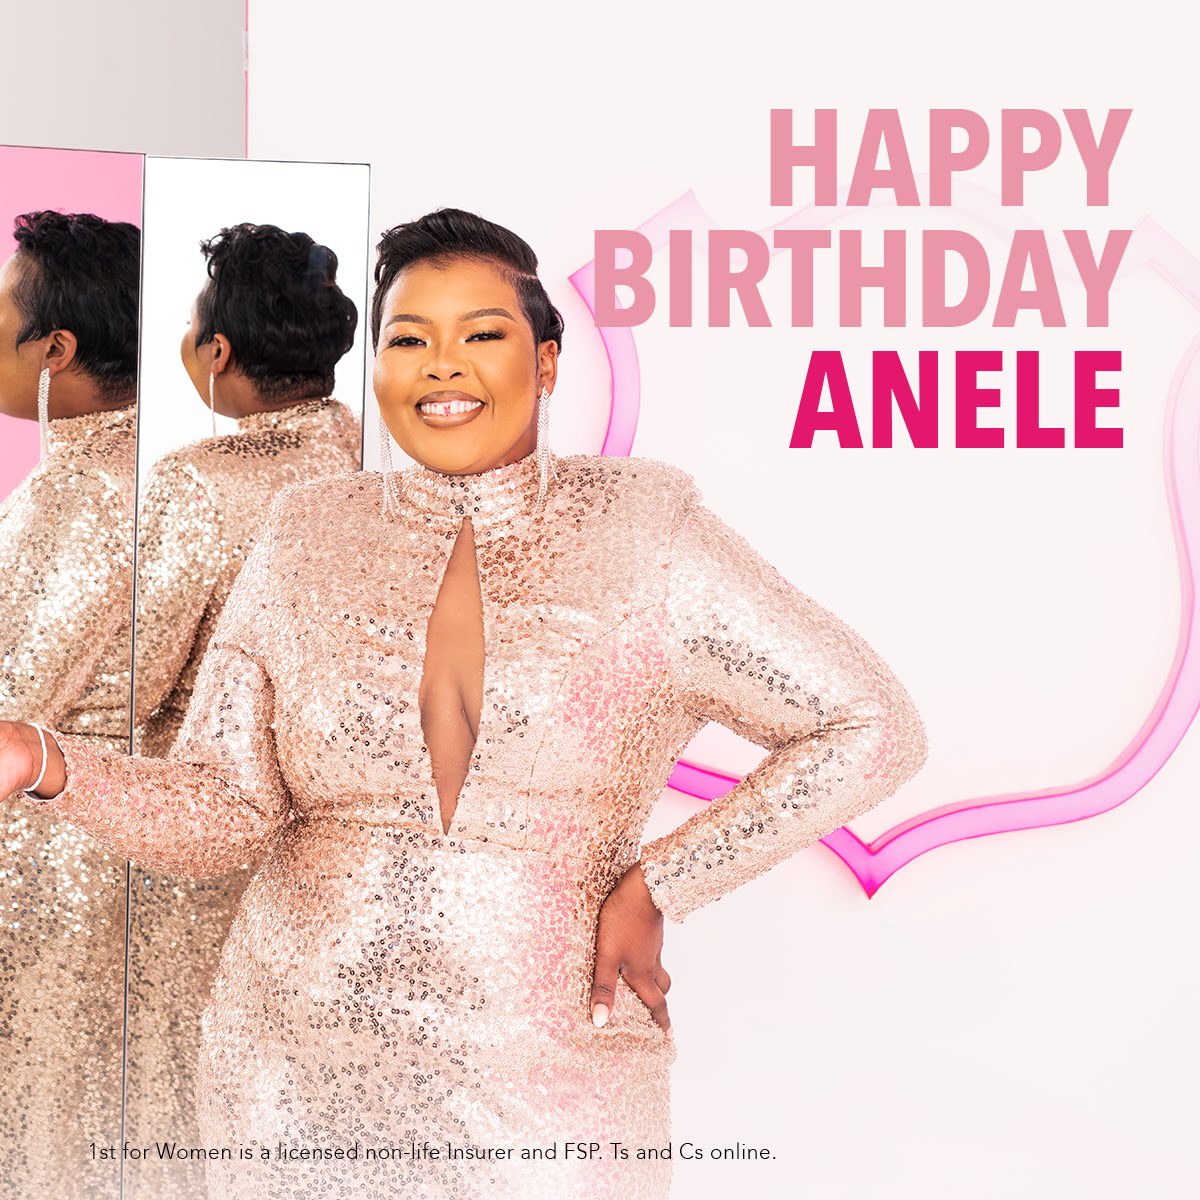 Join us in wishing one of the queens of fearless, @Anele, a happy birthday. Today we celebrate you. 🎂 #Fearless40